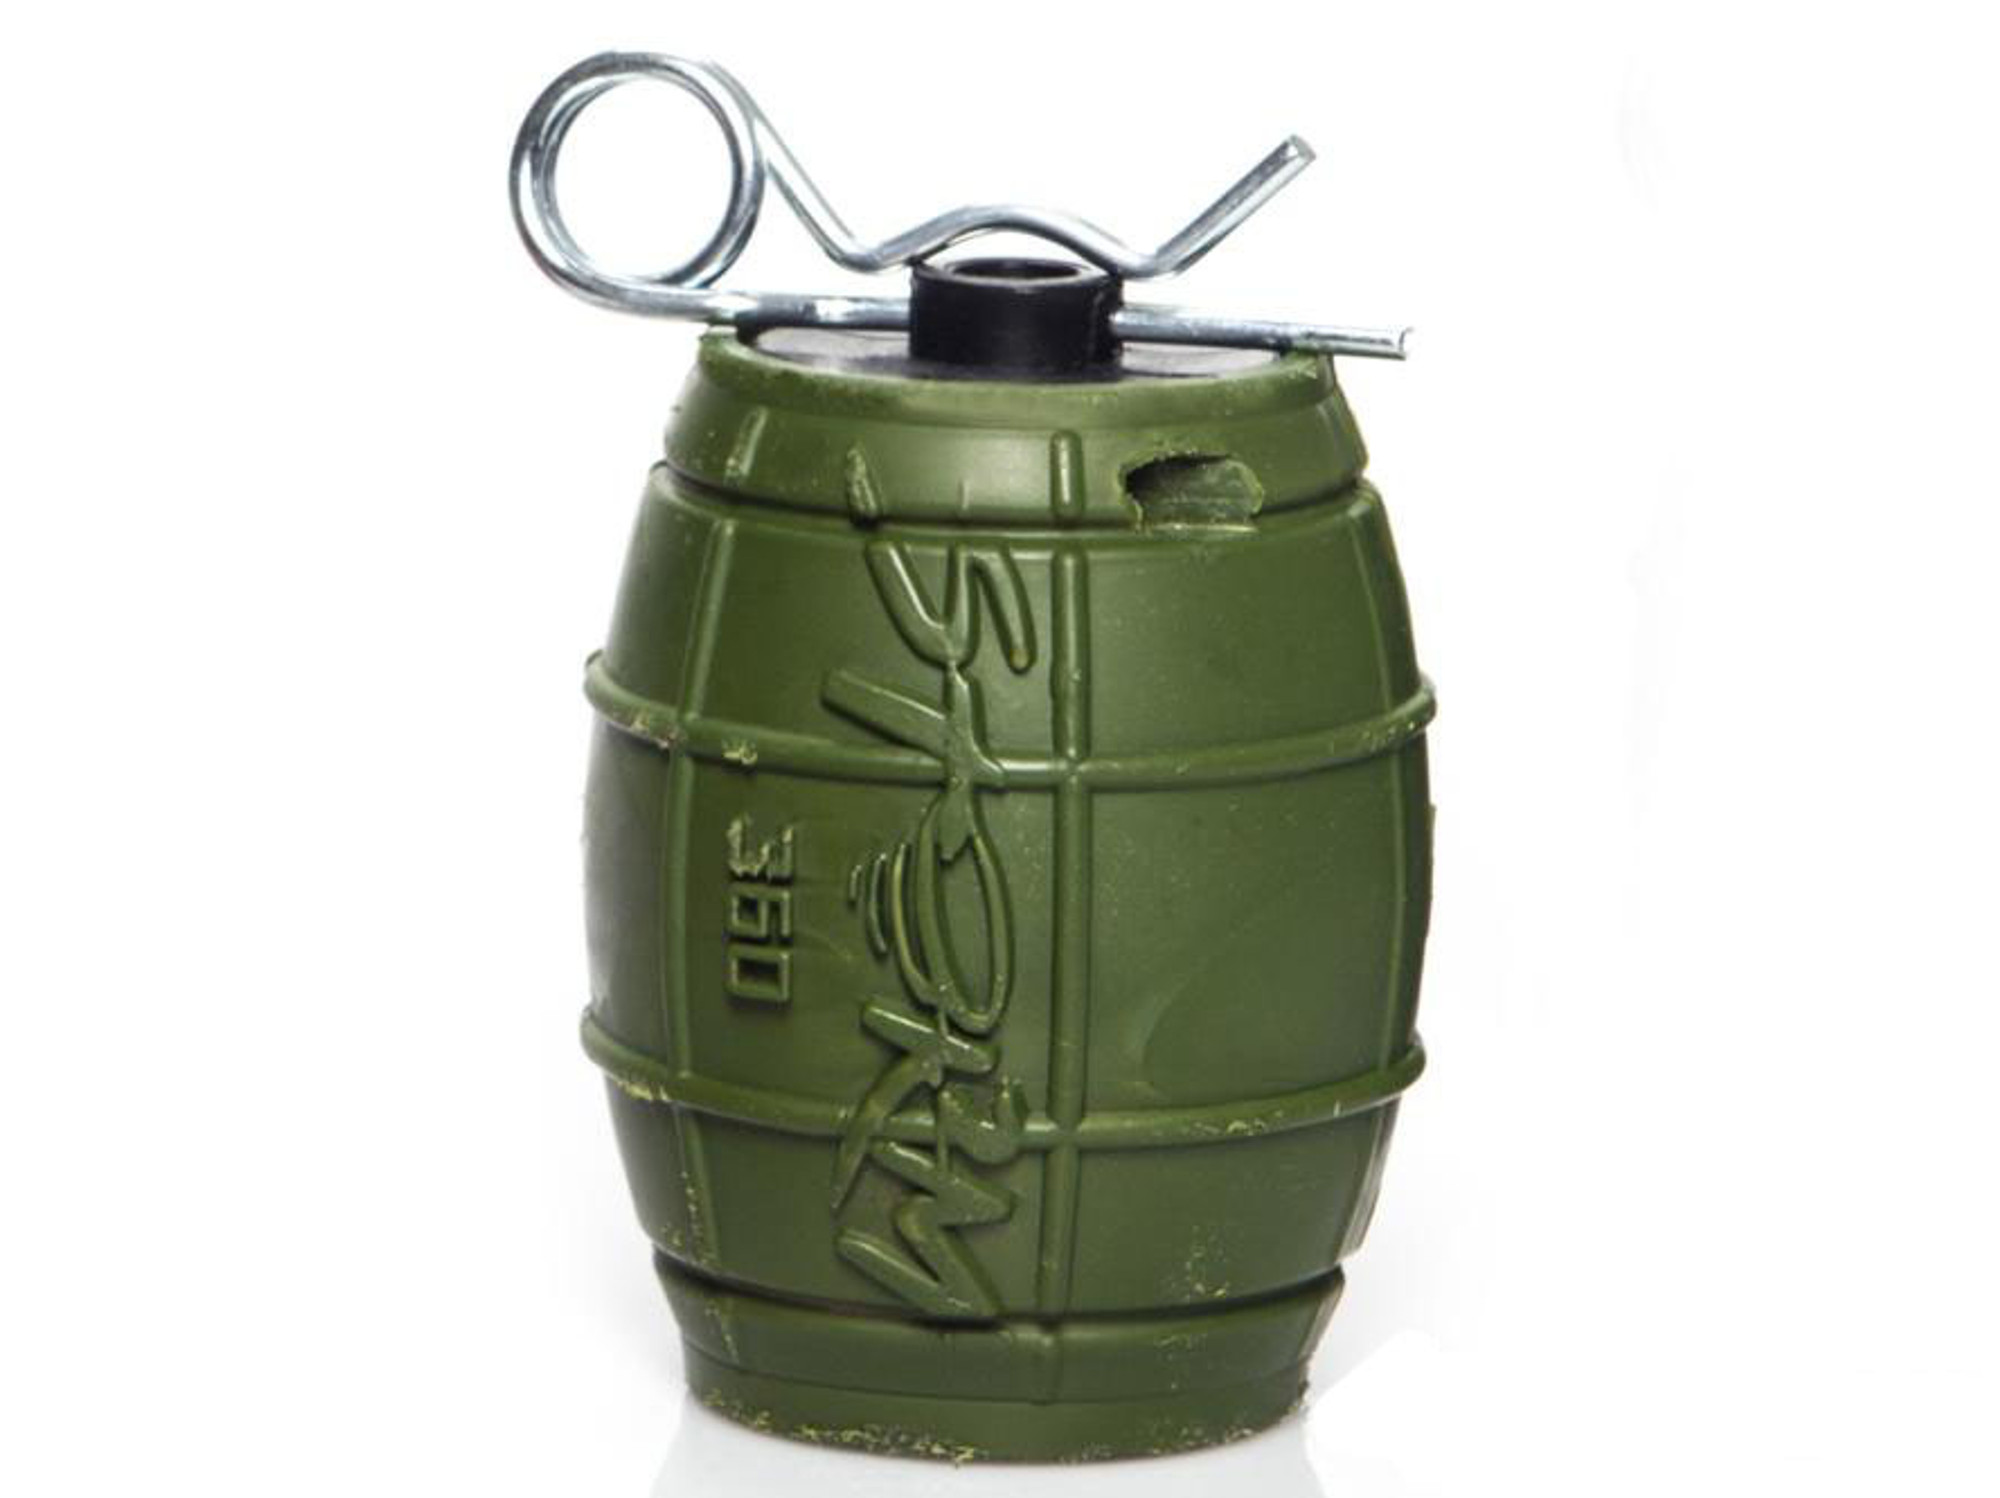 ASG Storm 360 Impact Gas Grenades - OD Green